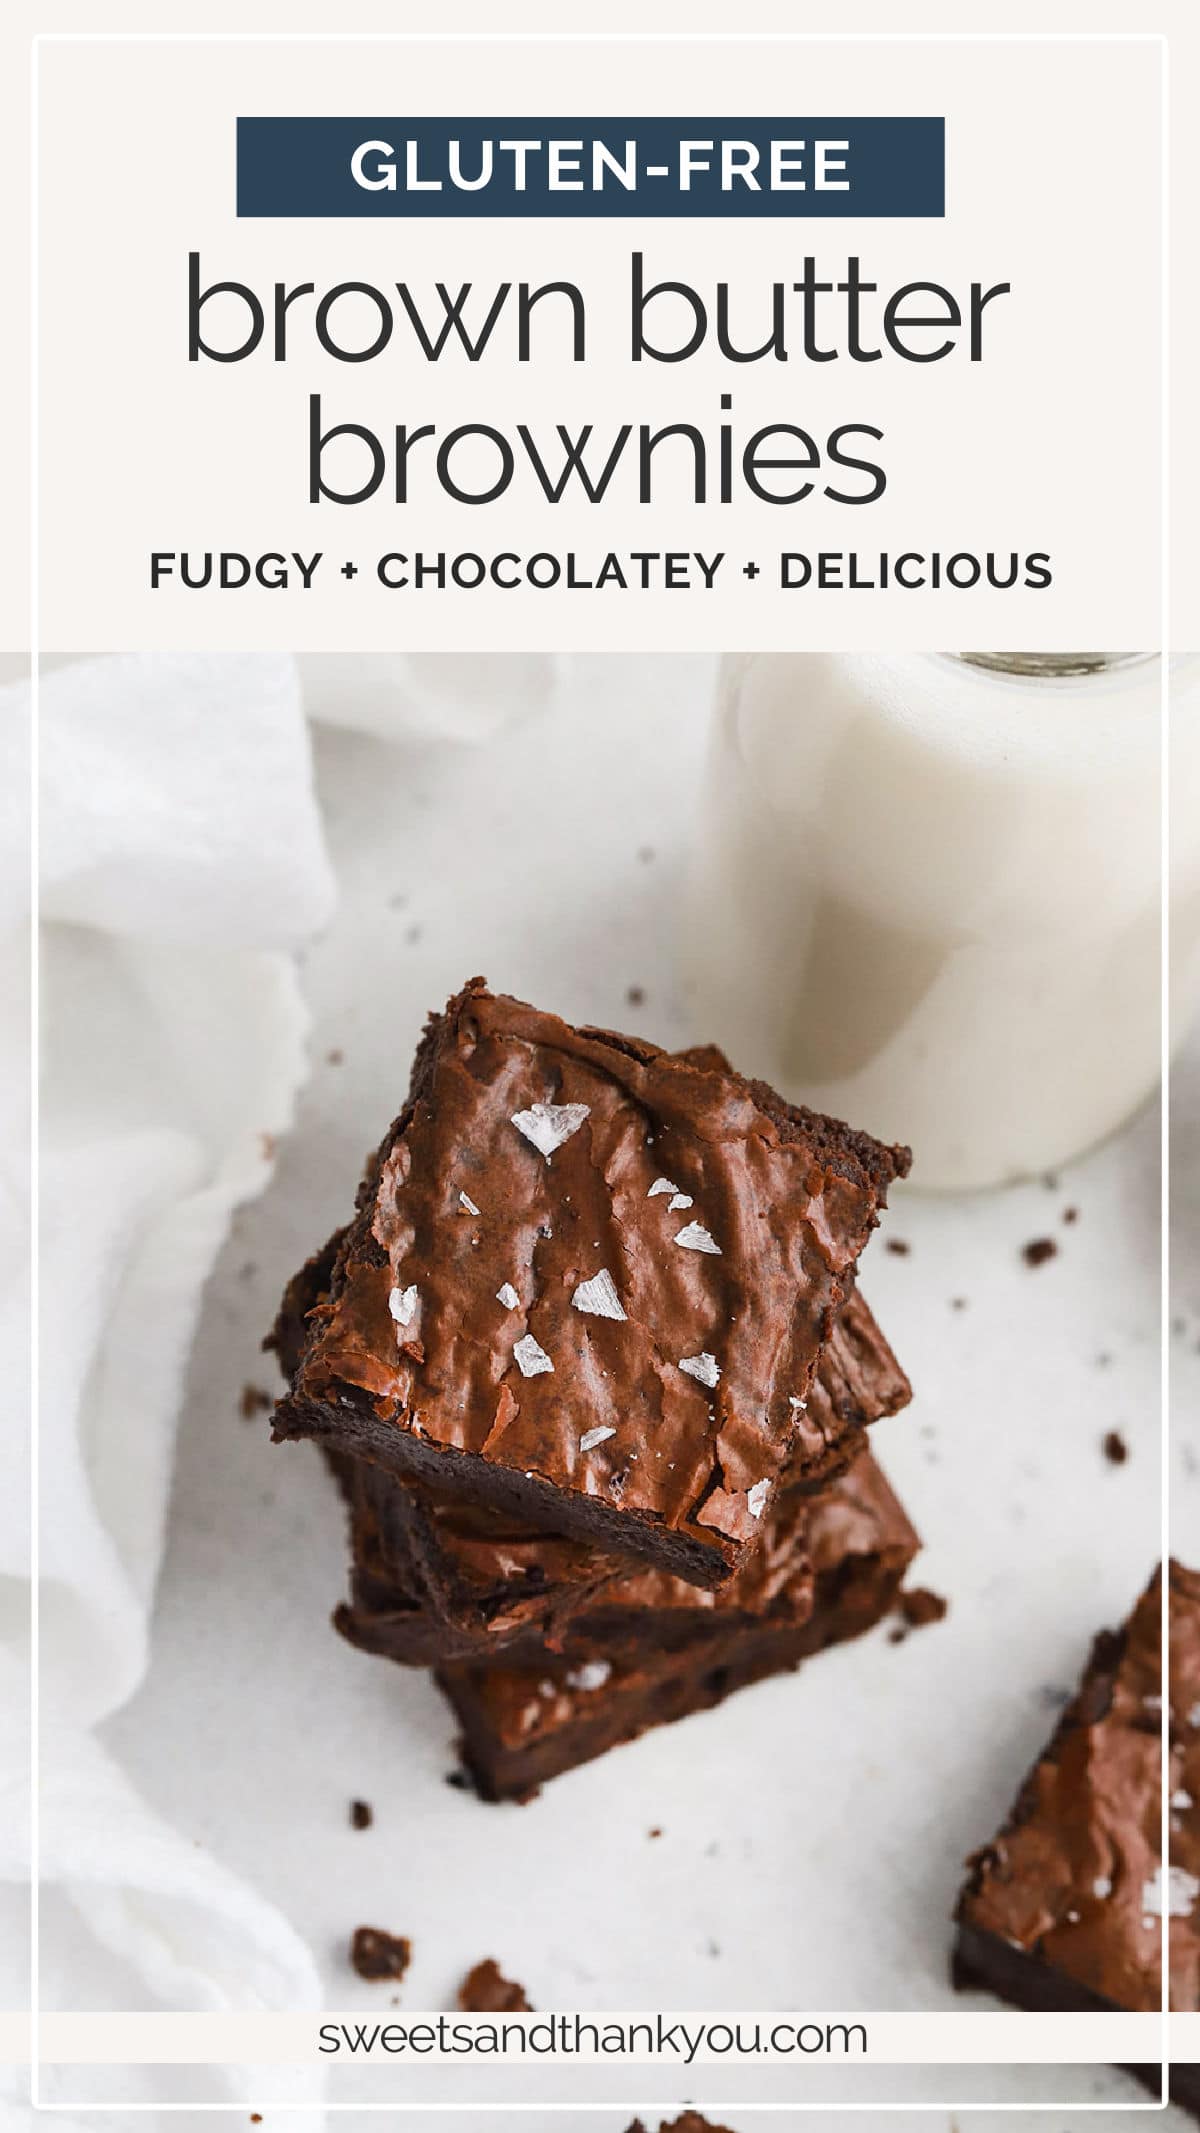 Gluten-Free Brown Butter Brownies - Fudgy gluten-free brownies that are perfect for a cozy day or chocolate craving. // Brown Butter Brownie Recipe // Gluten Free Brownies // Gluten-Free Baking #glutenfree #brownies #brownbutter #brownbutterbrownies #glutenfreebrownies #chocolate